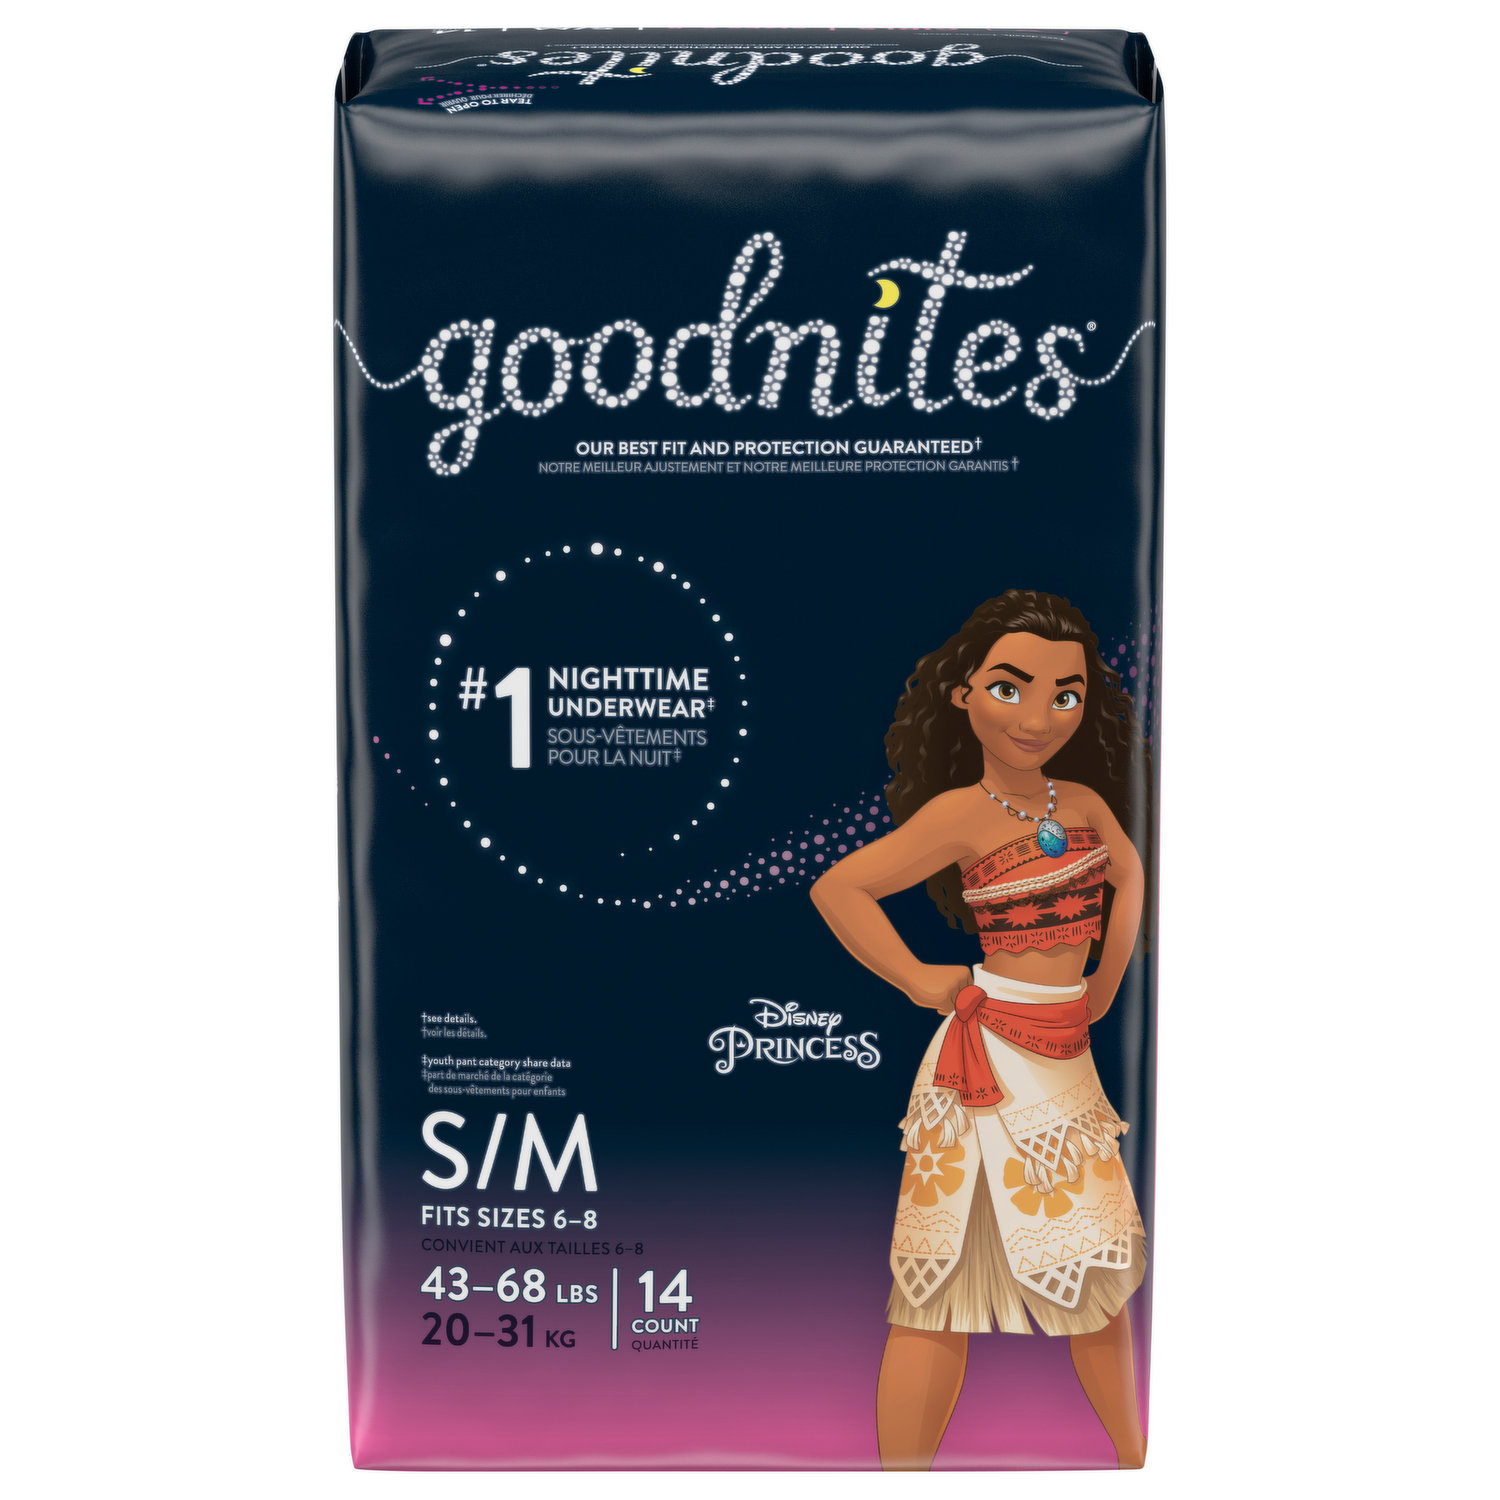  Goodnites Girls' Nighttime Bedwetting Underwear, Size Large  (68-95 lbs), 75 Ct (3 Packs of 25), Packaging May Vary : Health & Household